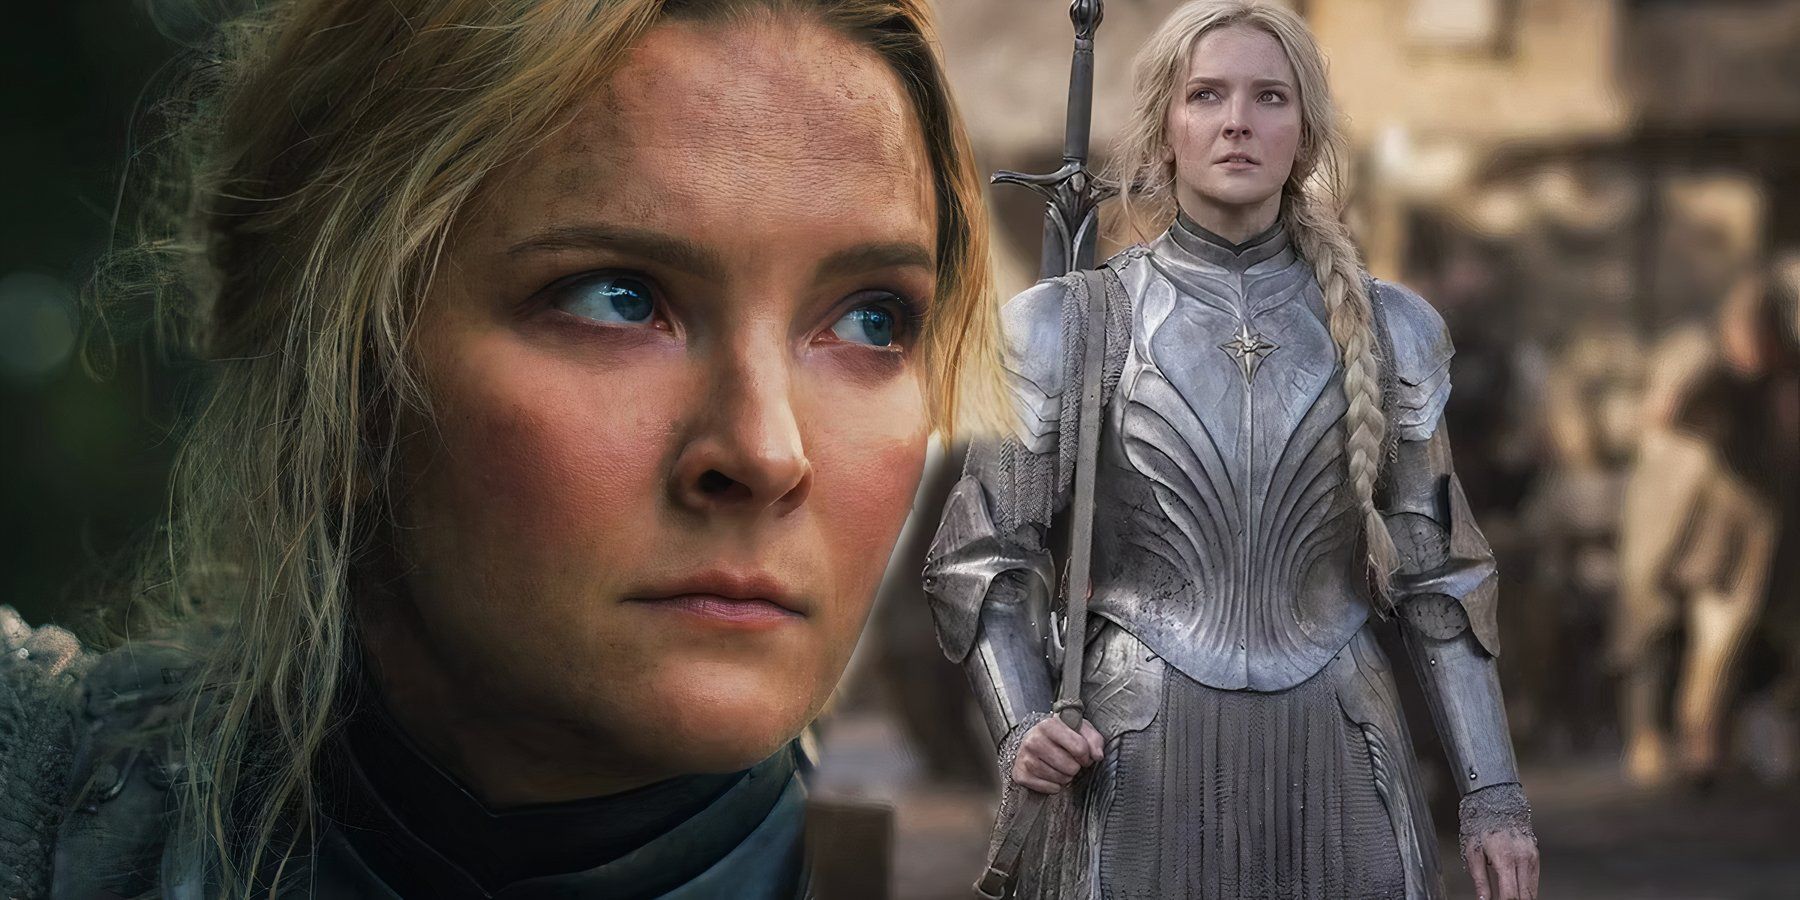 Morfydd Clark as Galadriel looking off to the side next to Galadriel in armor in The Rings of Power